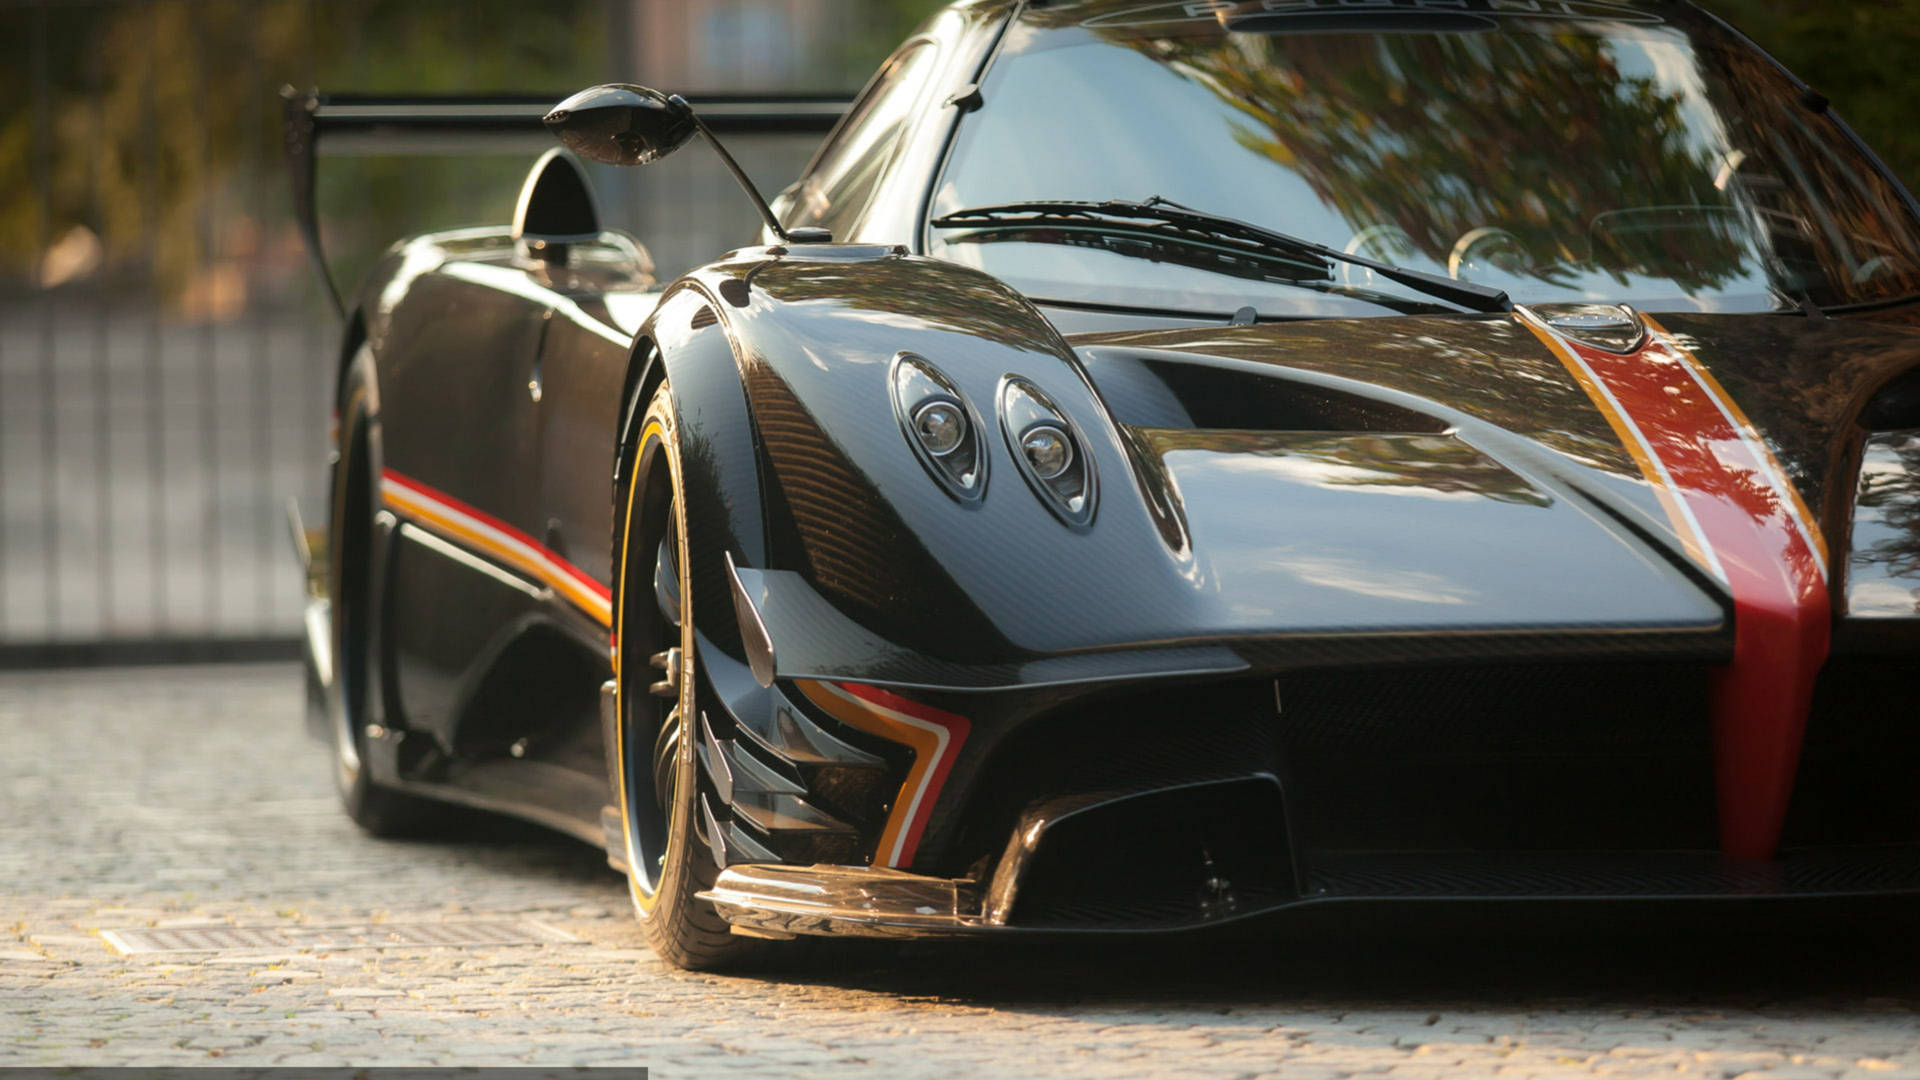 An Exhilarating Ride In The Luxurious Angle Of The Pagani Huayra.